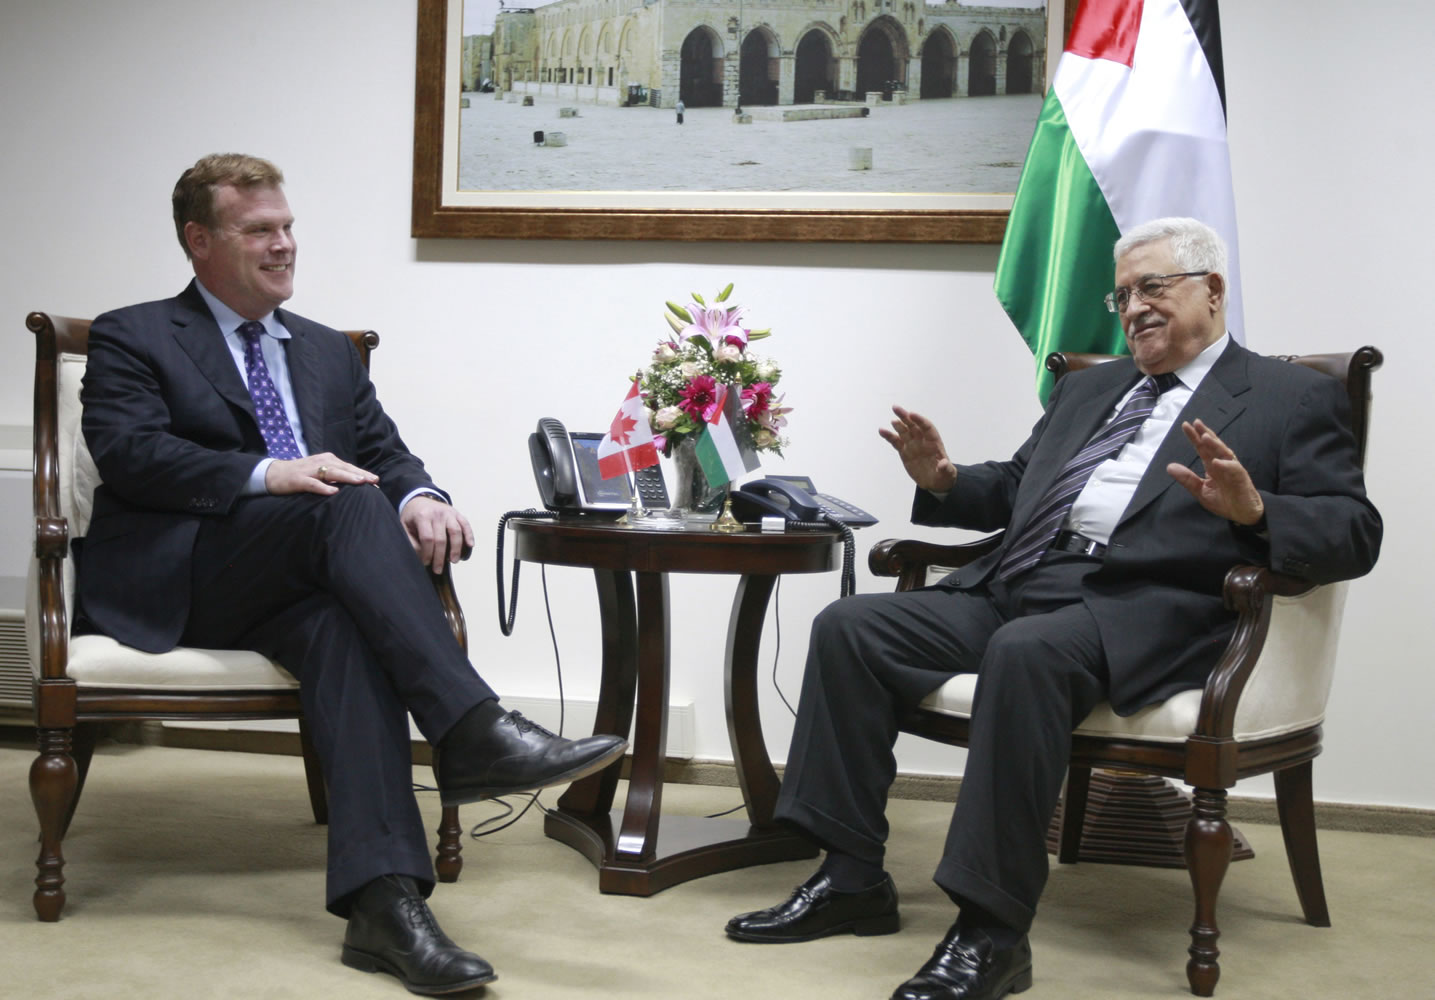 Palestinian President Mahmoud Abbas, right, speaks with Canada's foreign minister John Baird during their meeting in the West Bank city of Ramallah on Monday.